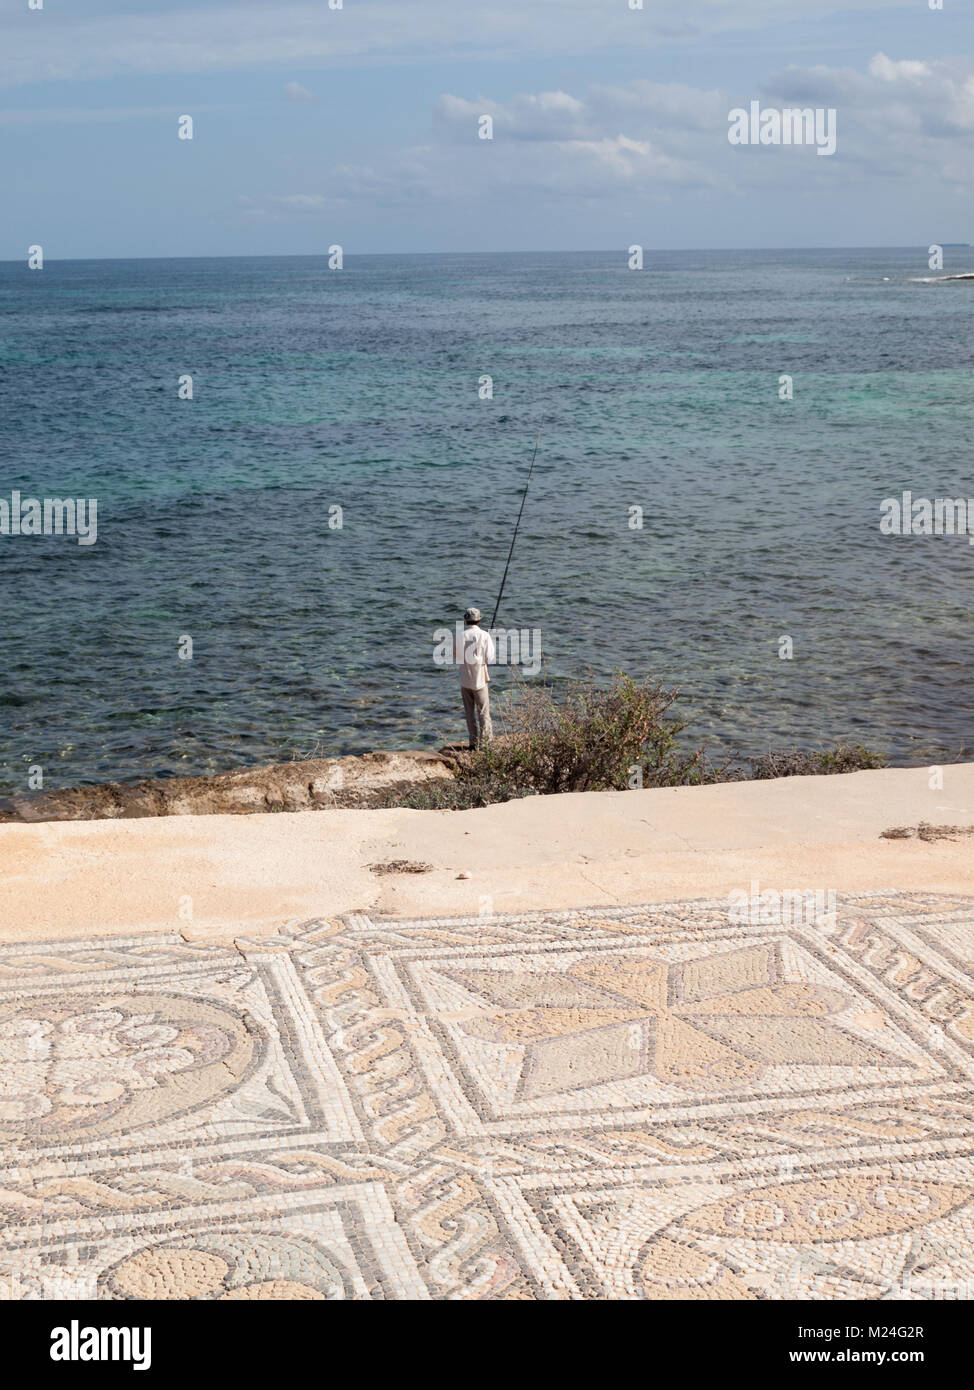 Mosaic of the Roman ruins of the Baths of Oceanus in Sabratha with sea and fisherman in background Stock Photo